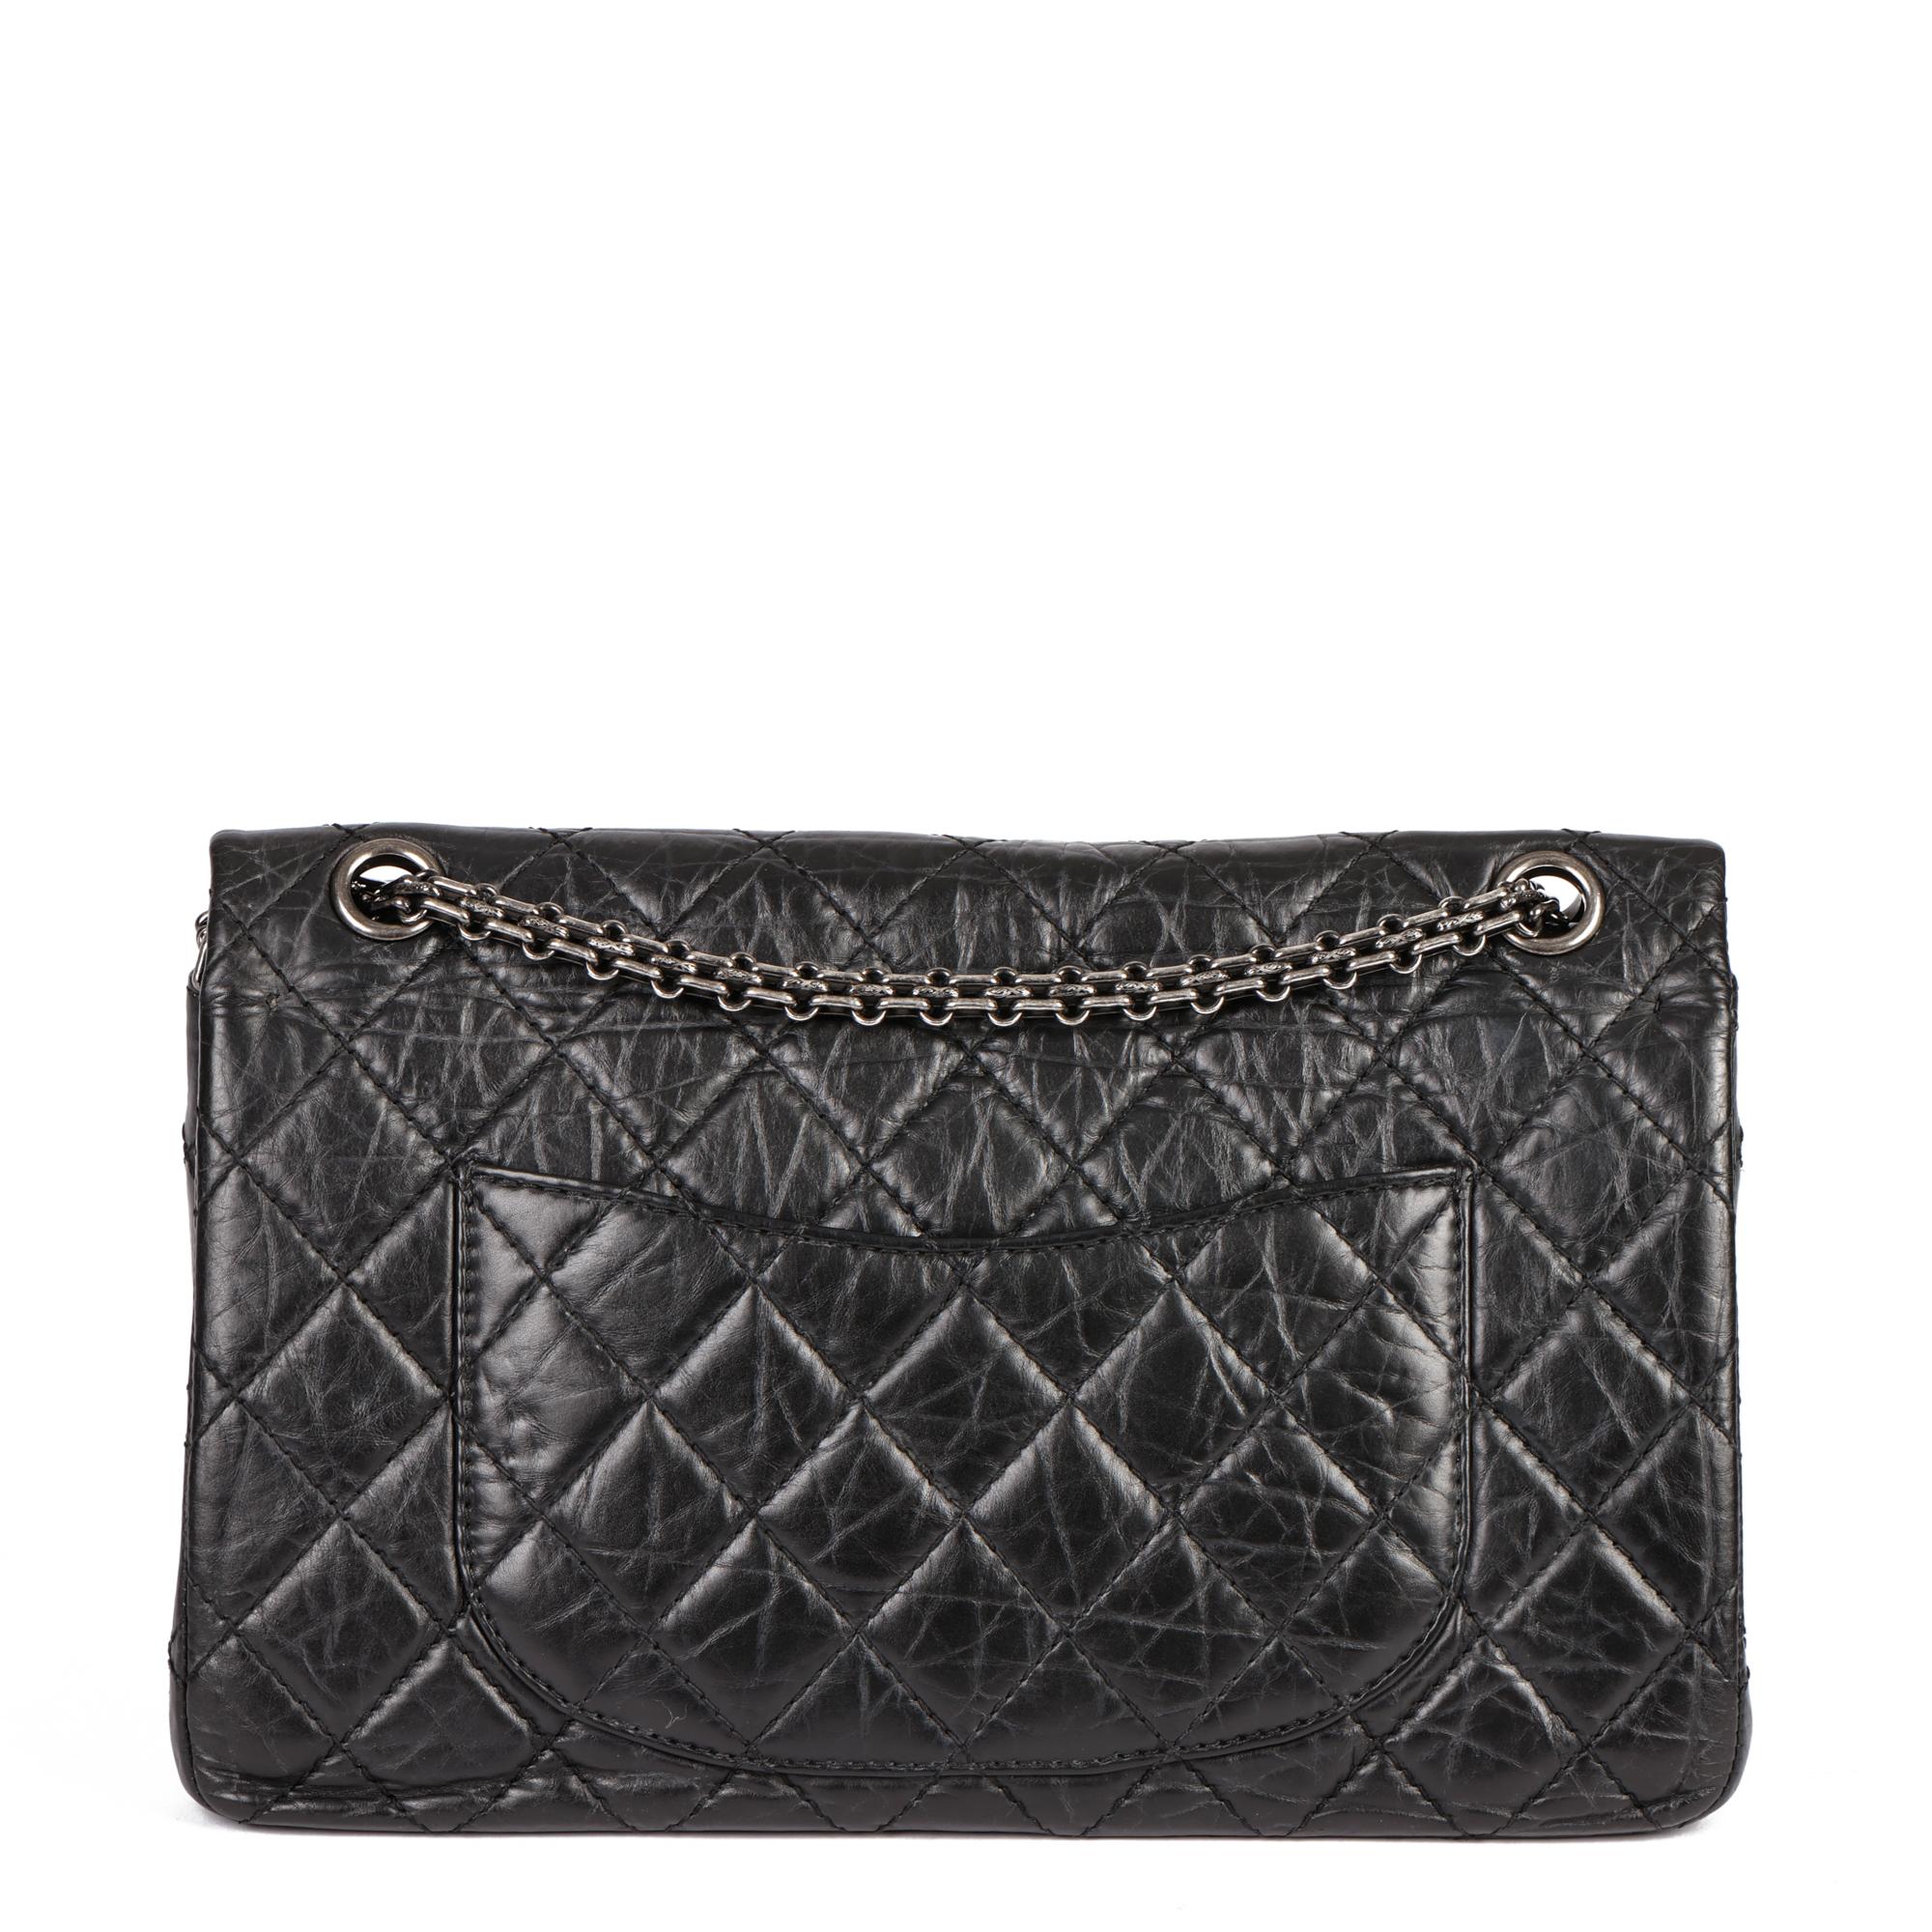 CHANEL Black Aged Calfskin Leather 226 2.55 Reissue Double Flap Bag 1